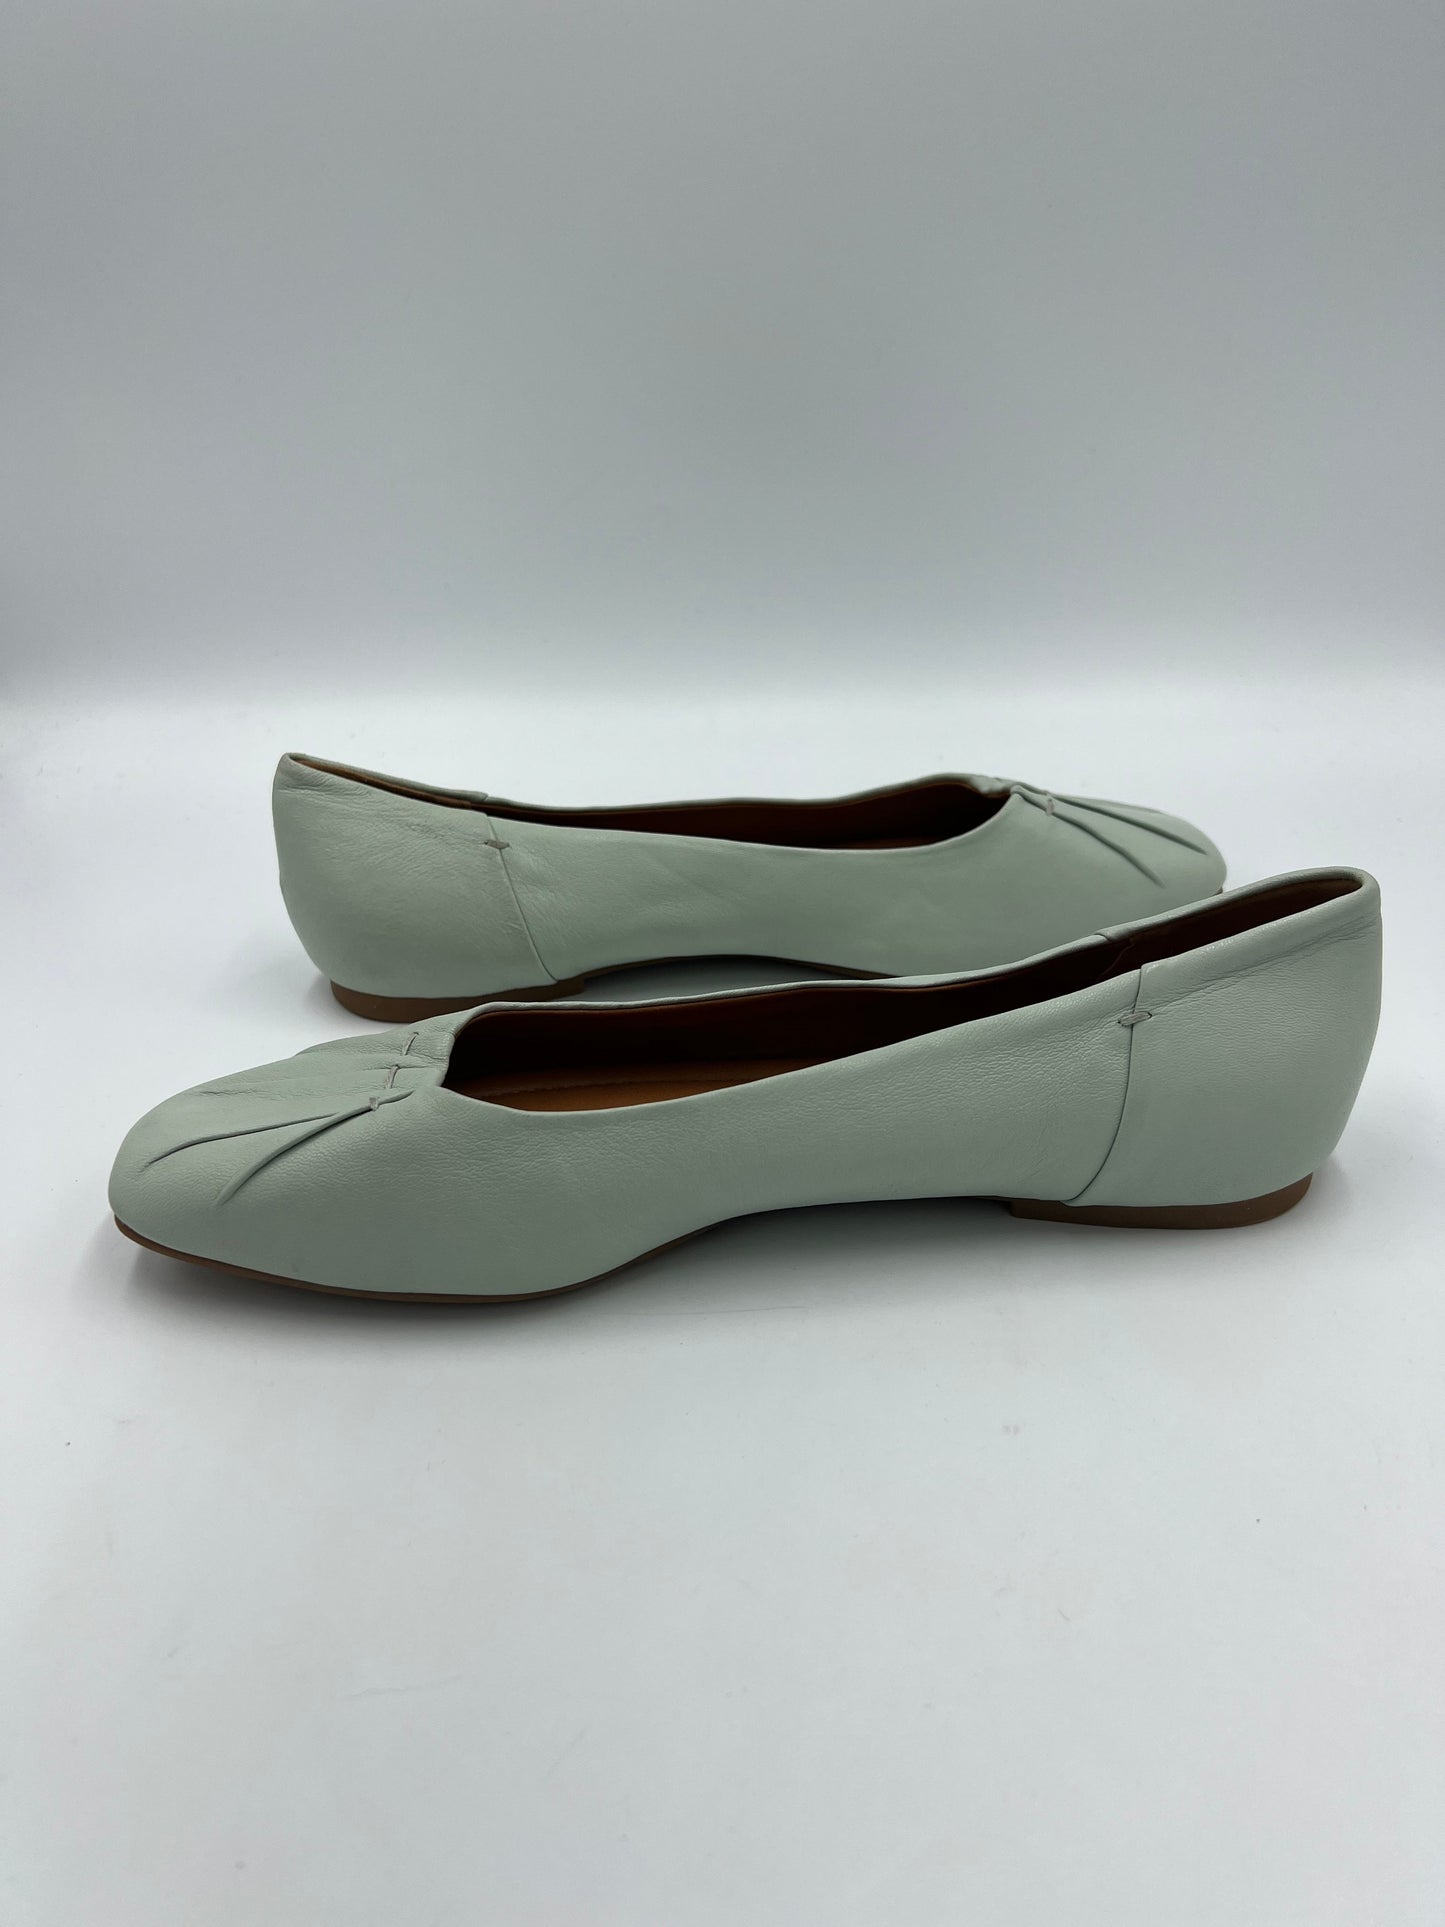 Like New! Shoes Flats Ballet Lucky Brand, Size 10